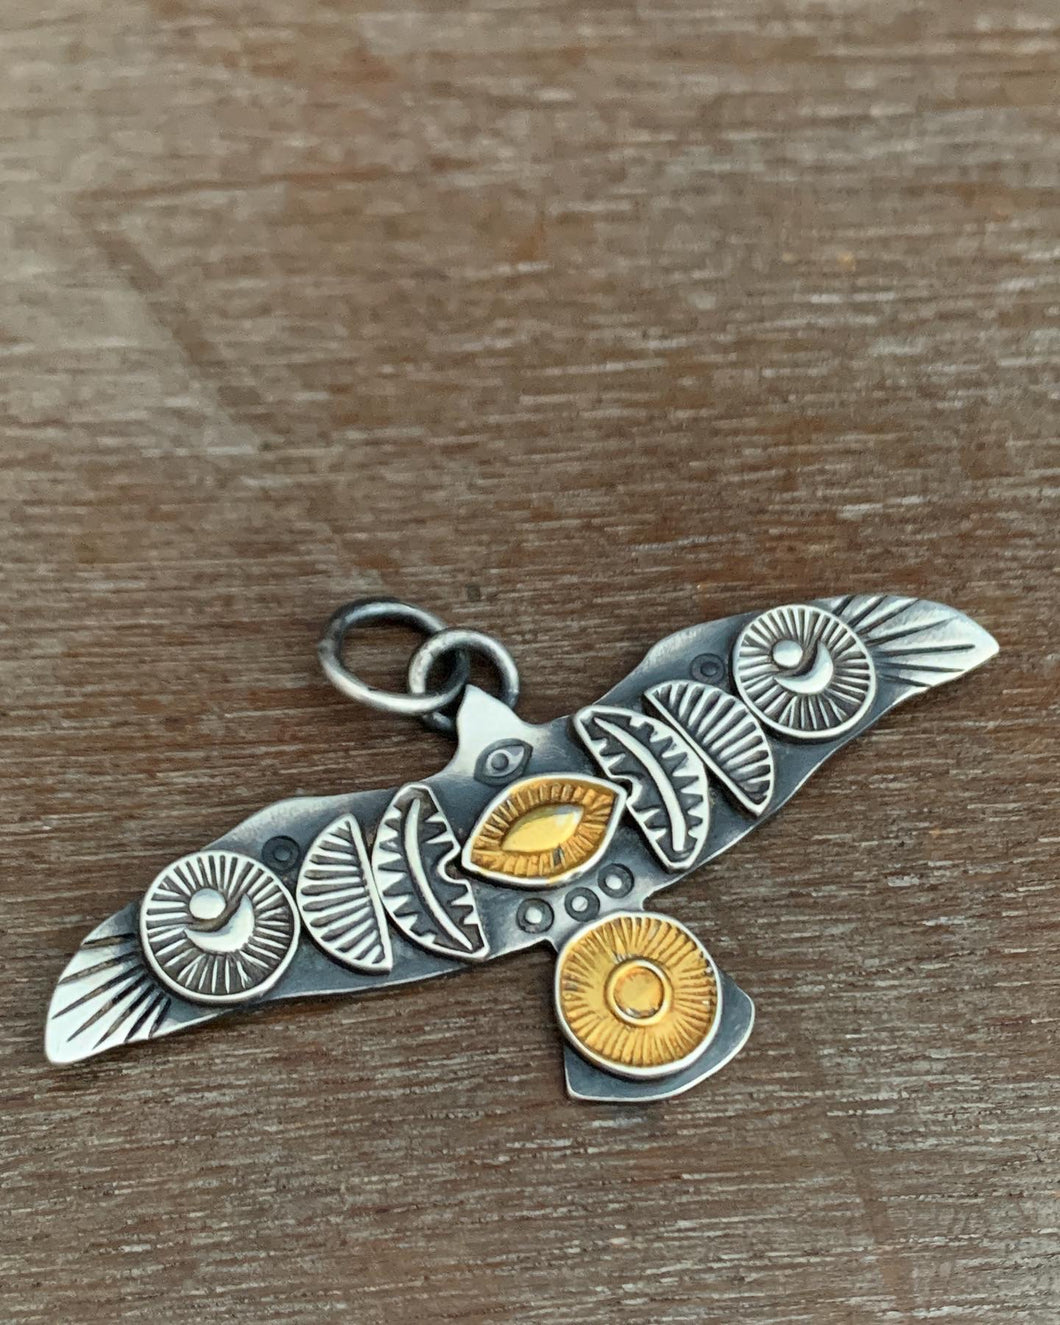 Large golden sun and eye stamped bird pendant